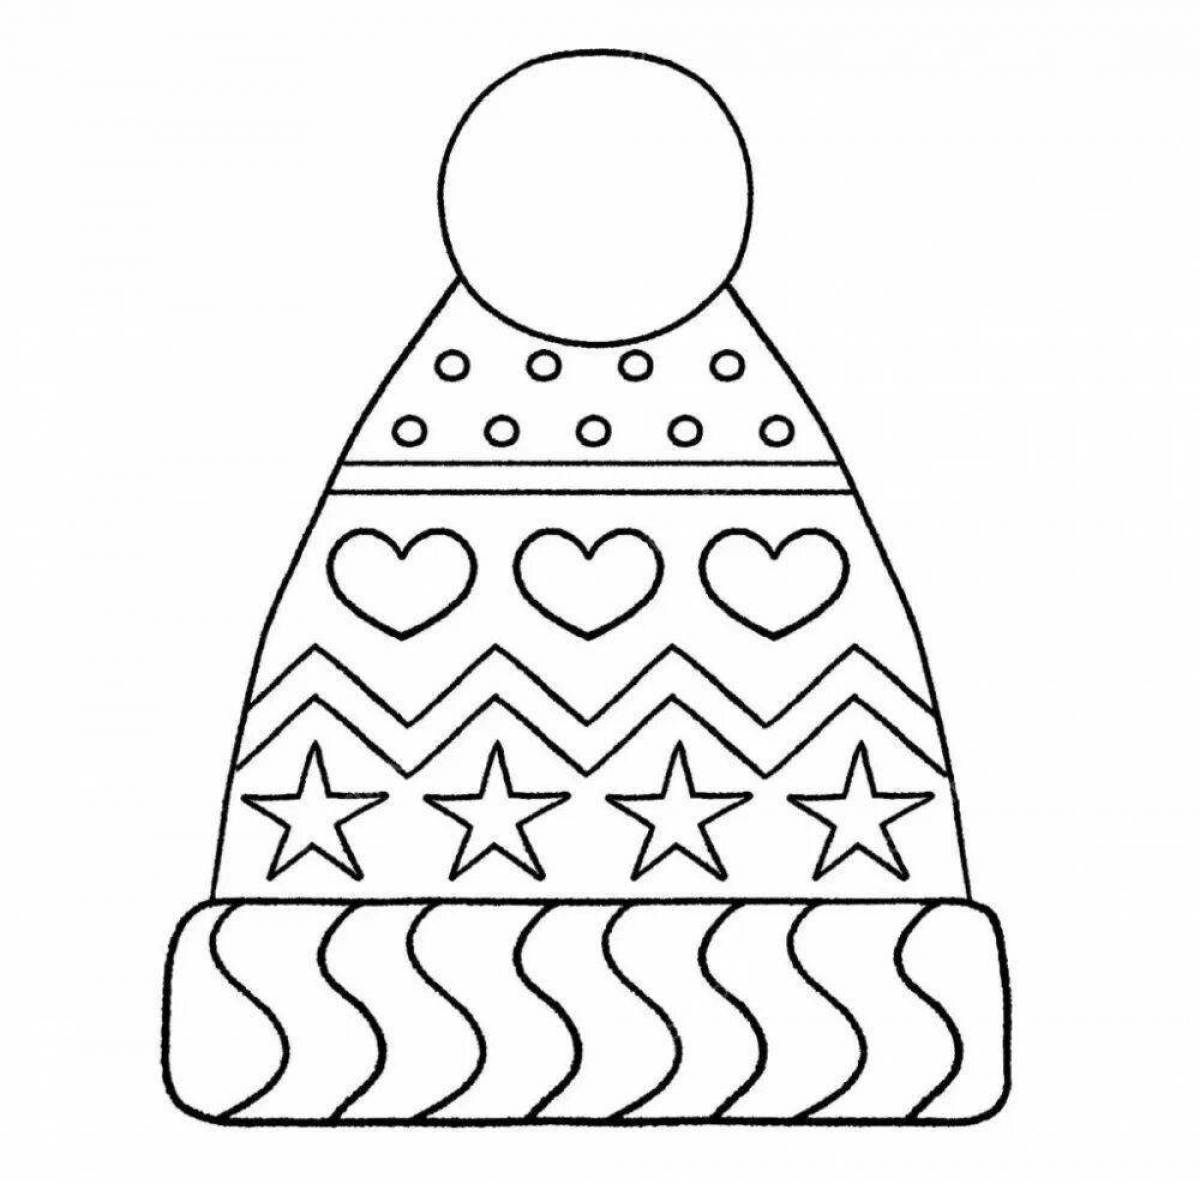 Coloring page dazzling hat and gloves